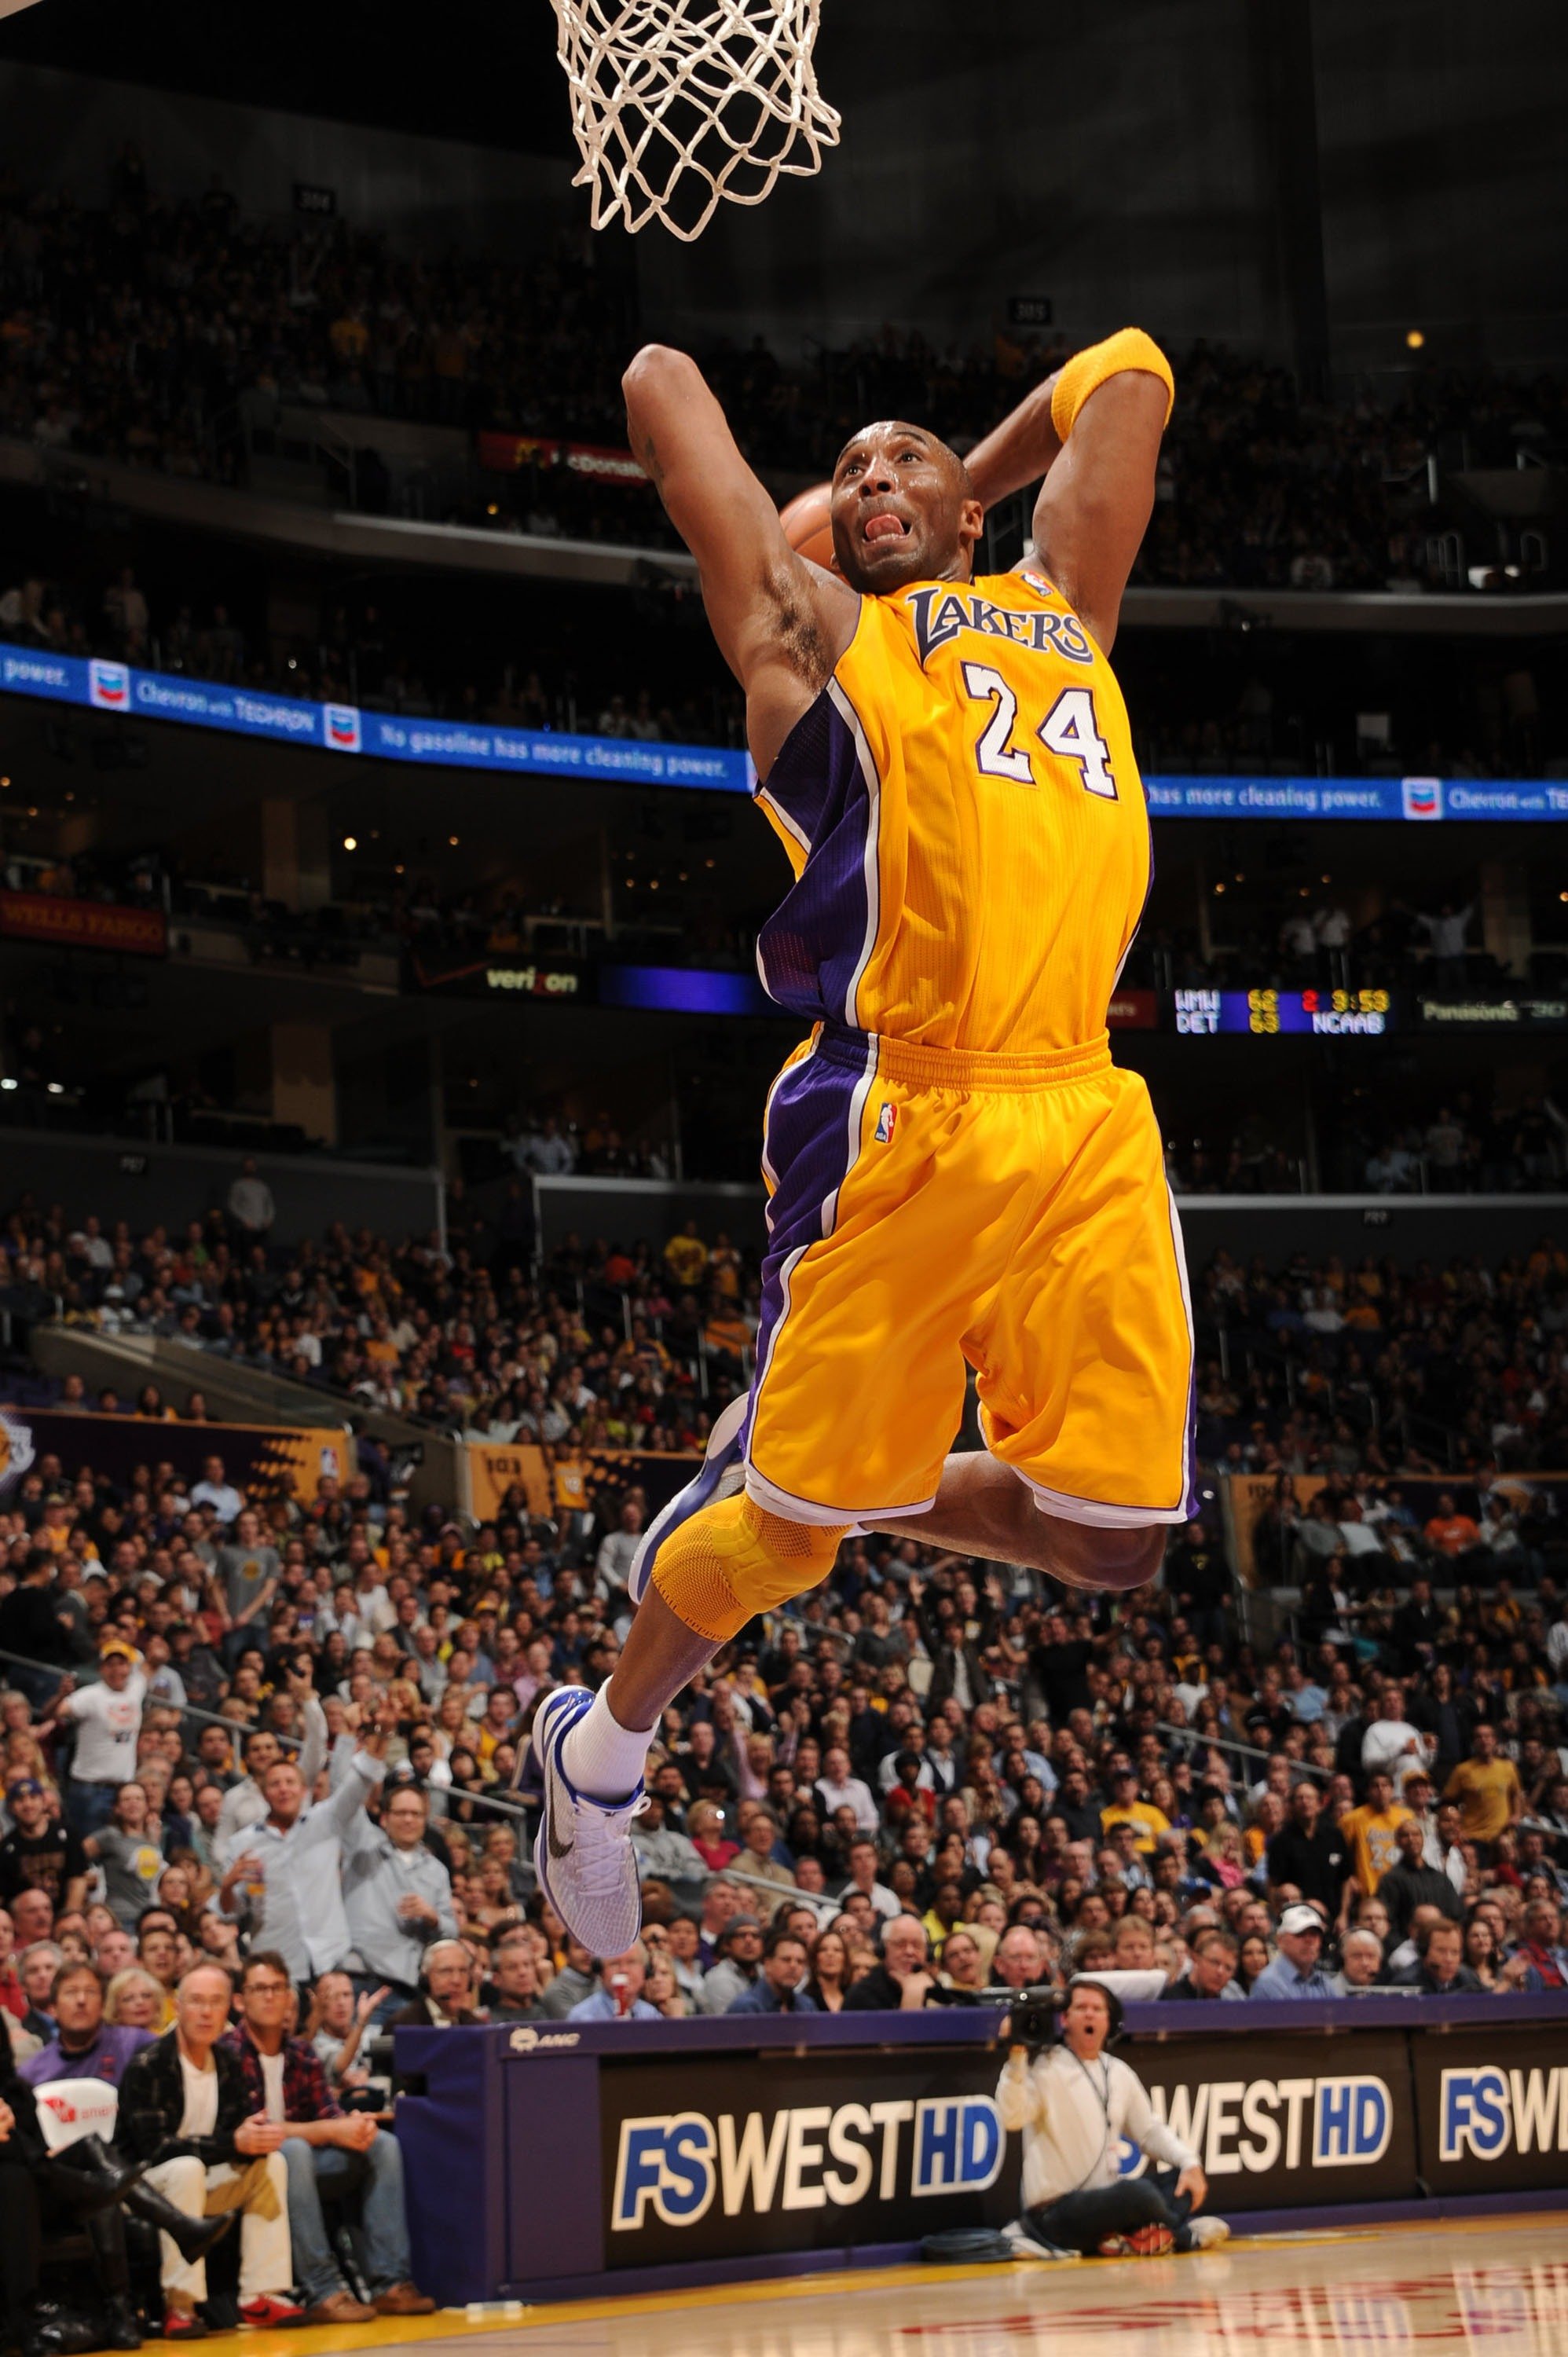 Kobe Bryant of the Los Angeles Lakers during a game against the Sacramento Kings in January 2011. | Photo: Getty Images